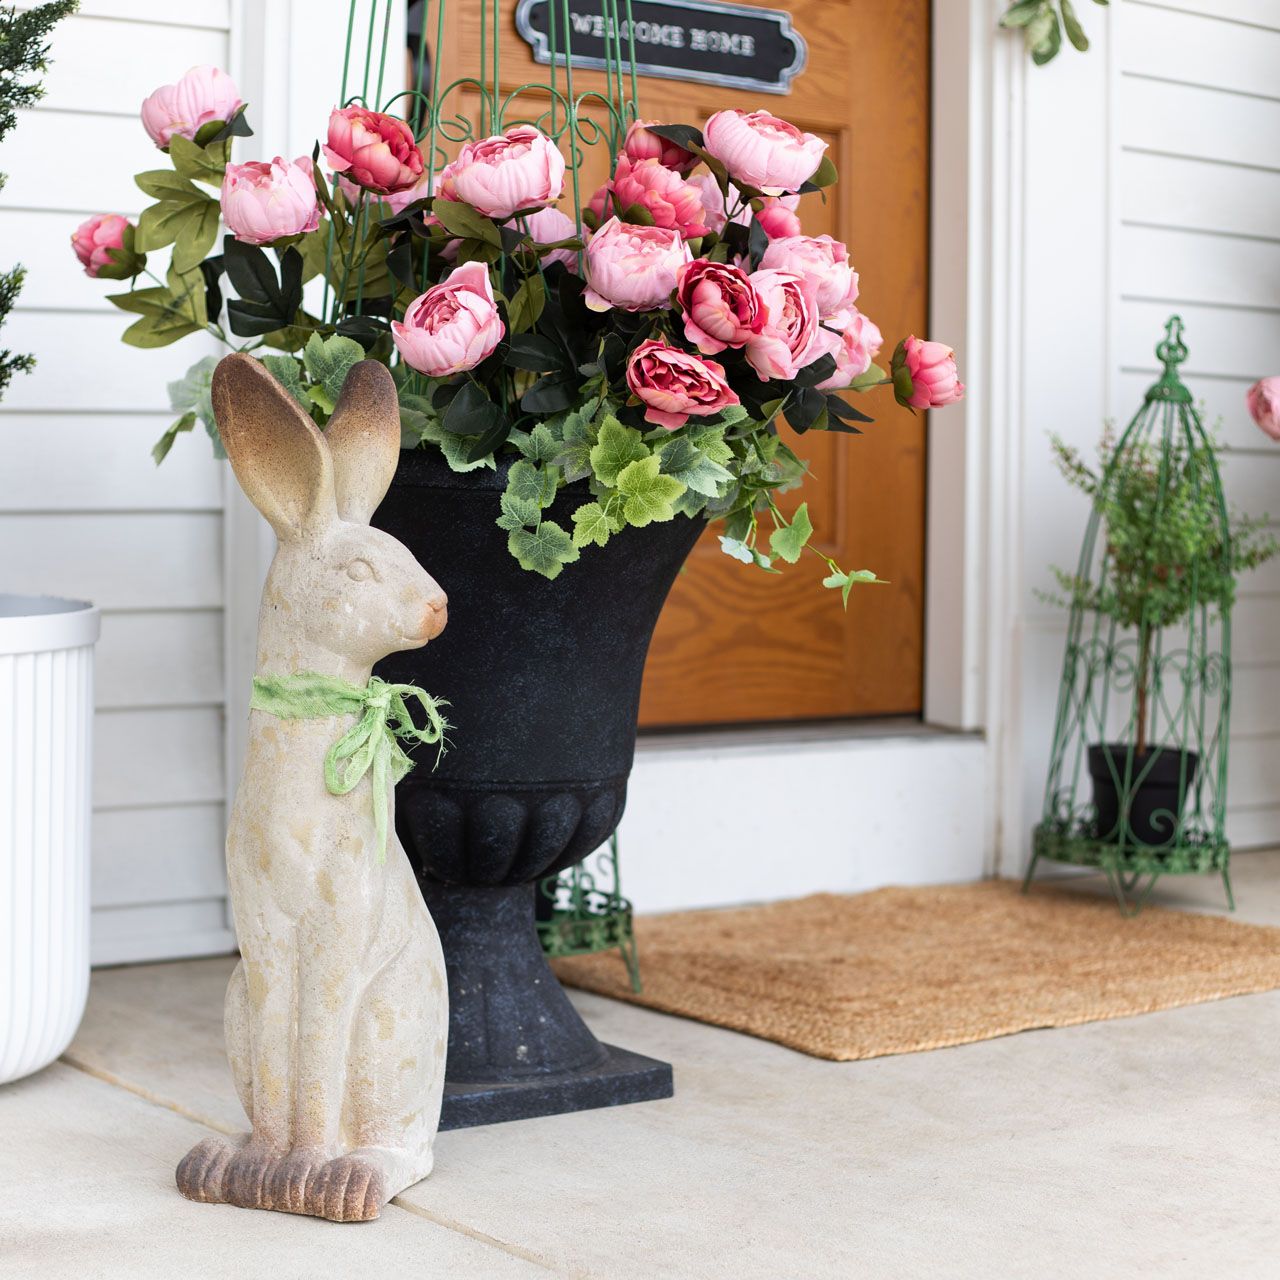 A Blooming Porch Scene from Photo Shoot